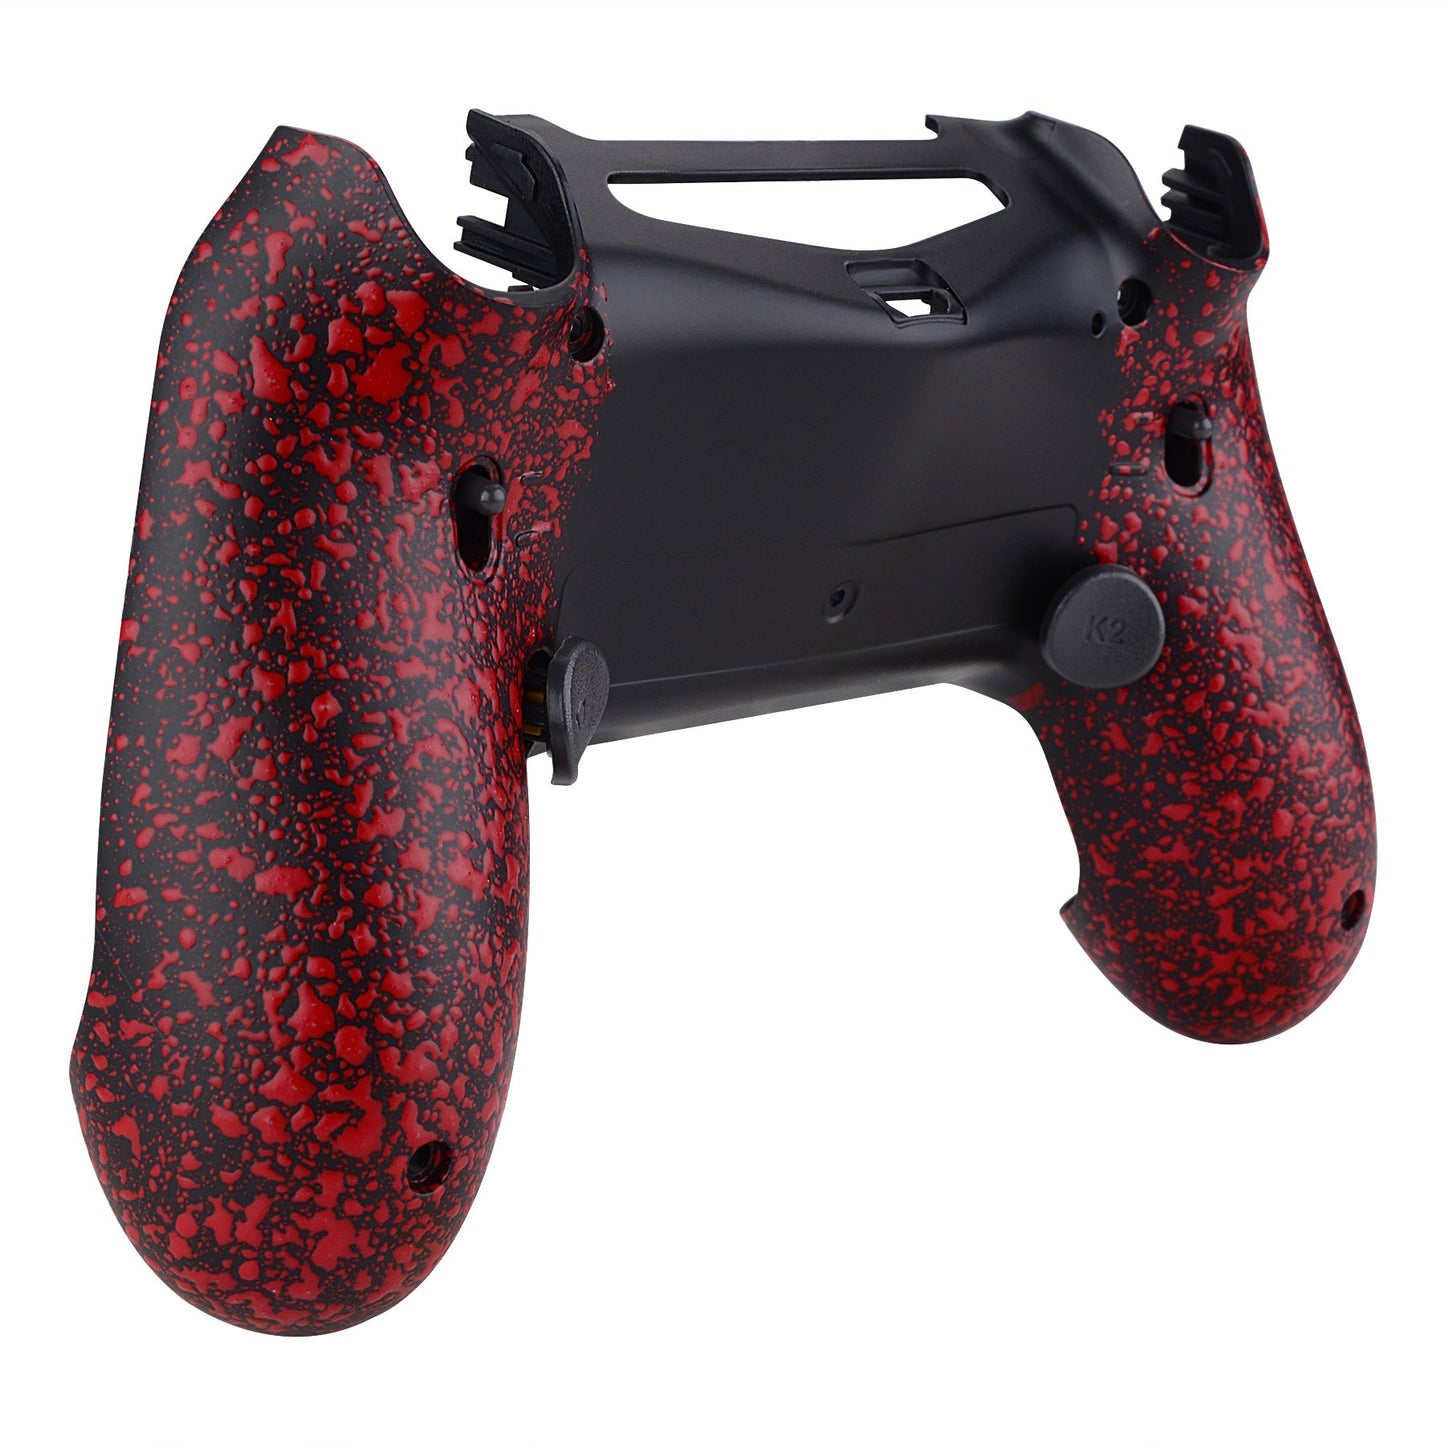 eXtremeRate Retail Textured Red Dawn 2.0 FlashShot Trigger Stop Remap Kit for ps4 CUH-ZCT2 Controller, Part & Back Shell & 2 Back Buttons & 2 Trigger Lock for ps4 Controller JDM 040/050/055 - P4QS003